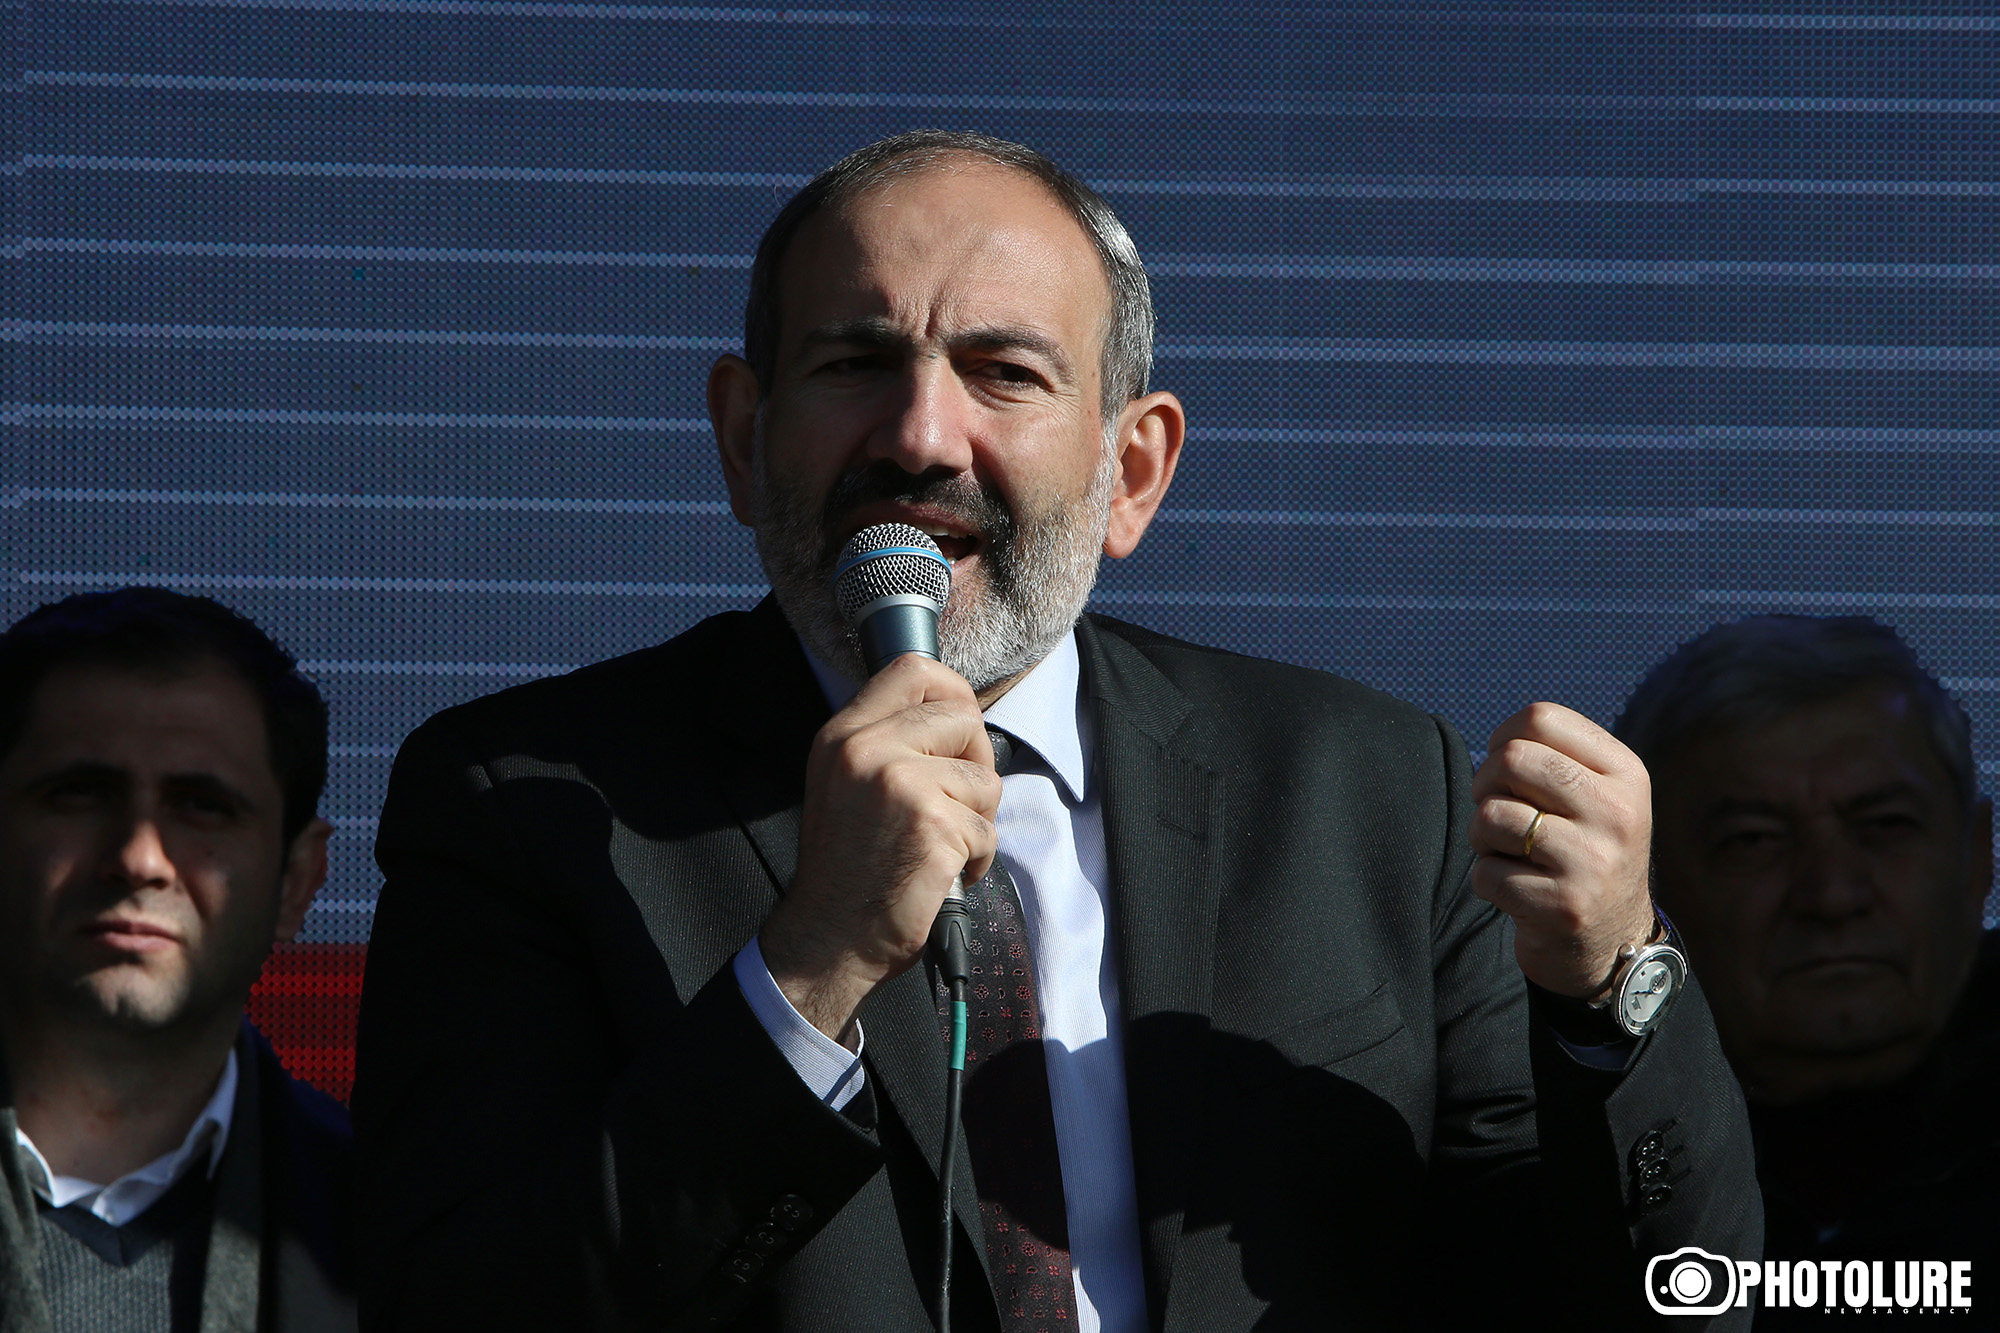 ‘We’ll lay them out on the asphalt and throw them against walls’: Pashinyan regarding RPA village and community authorities